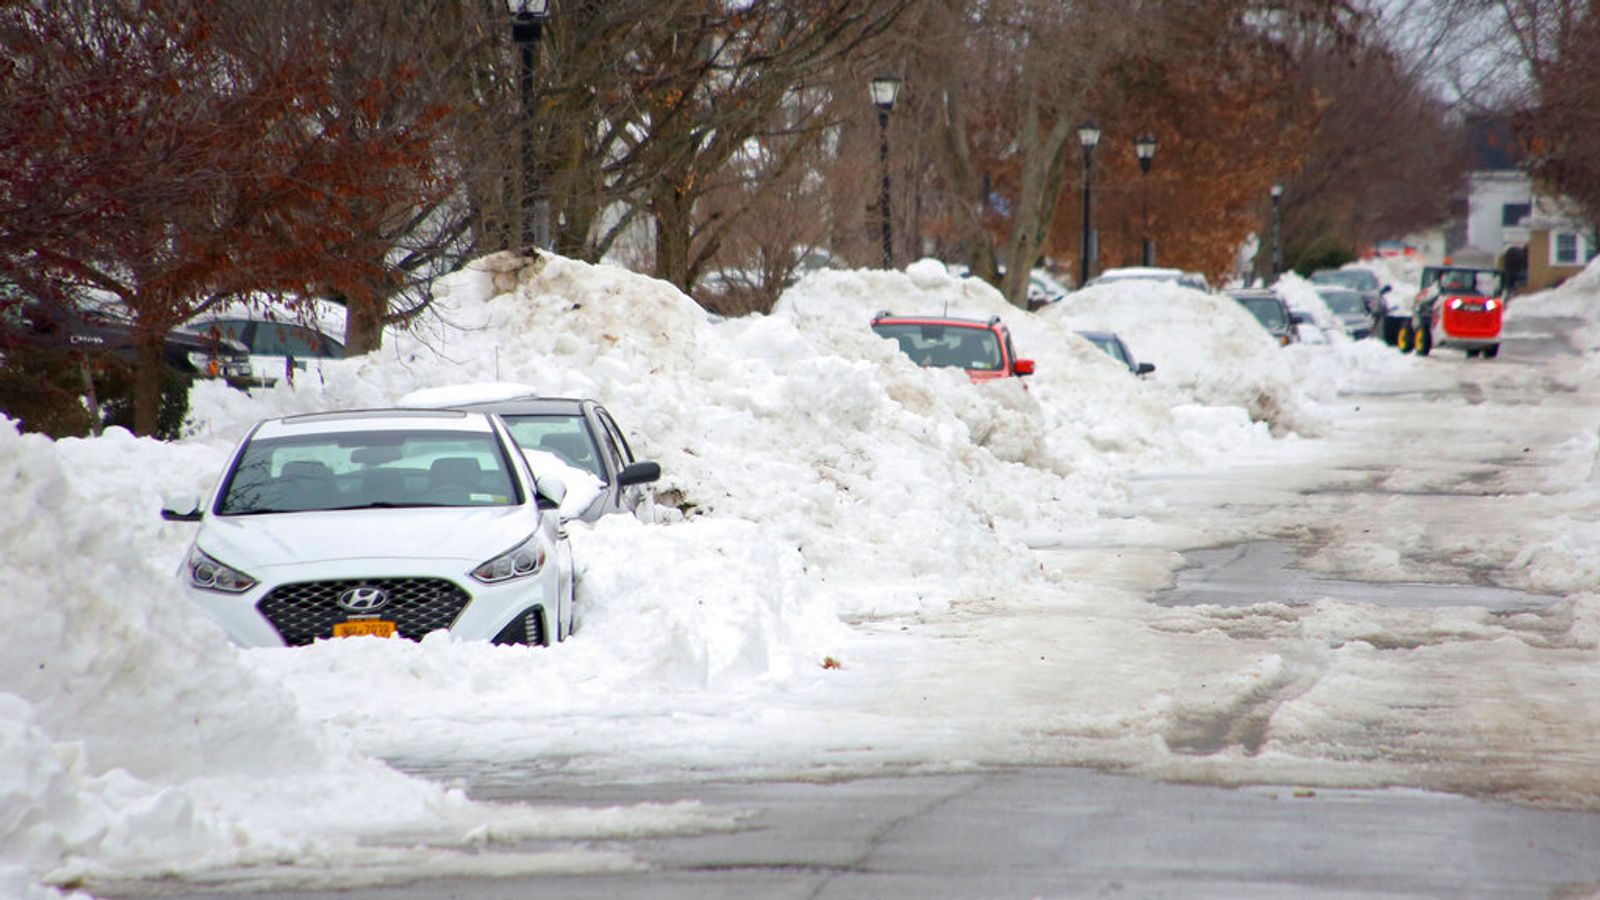 As the thaw begins, questions are asked about authorities' response to deadly US storm